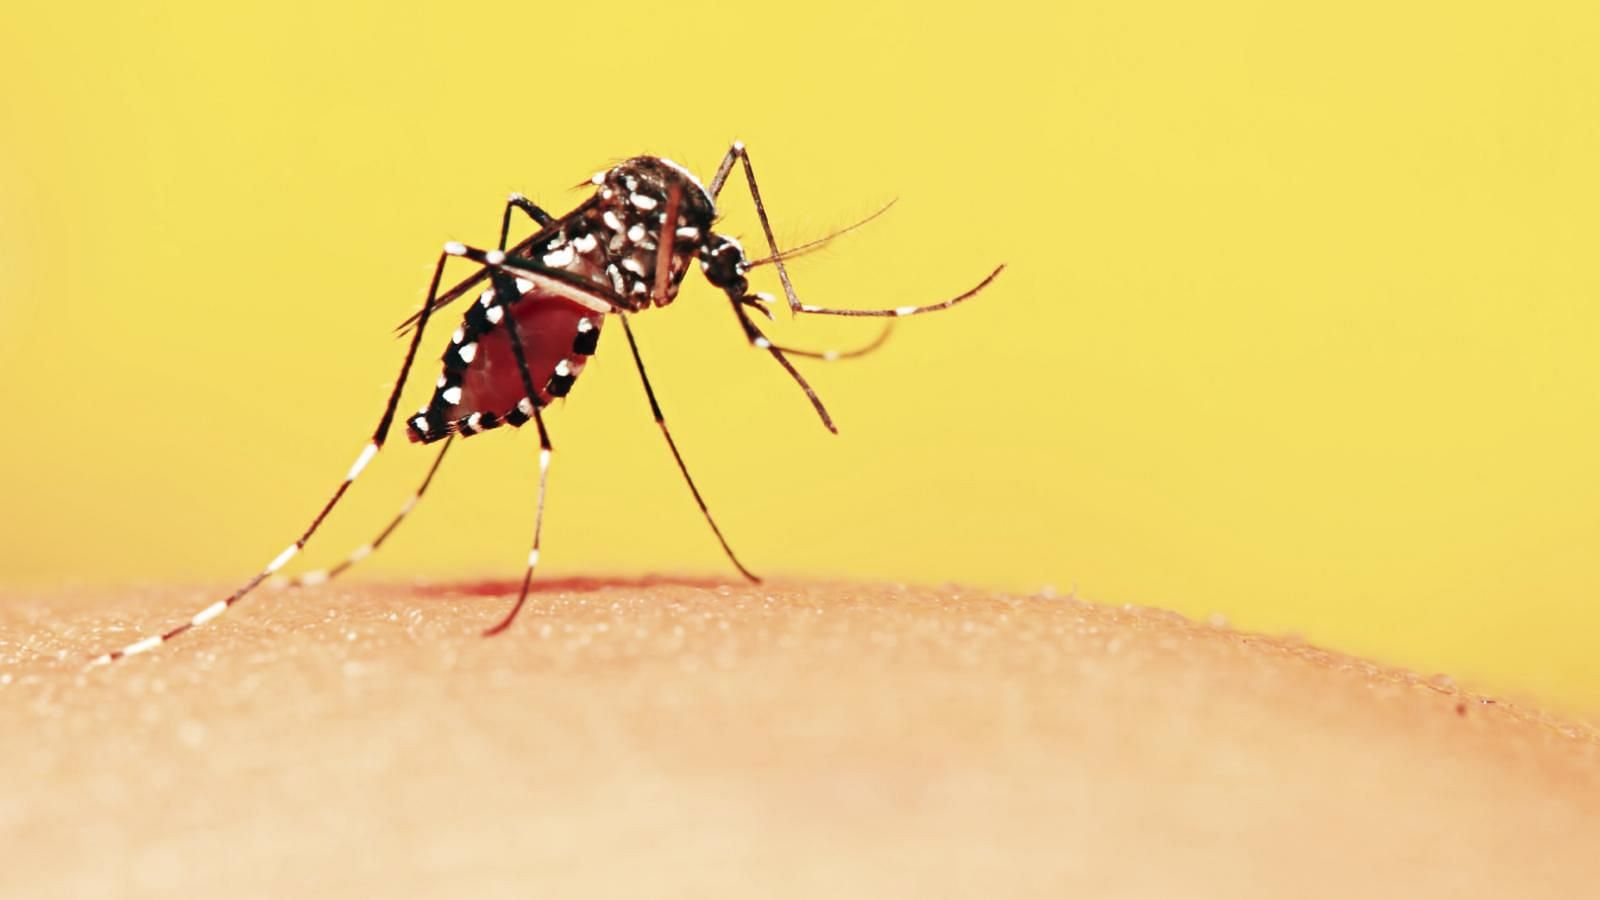 Malaria killed 435,000 people in 2017. The majority of them were children under five in Africa.